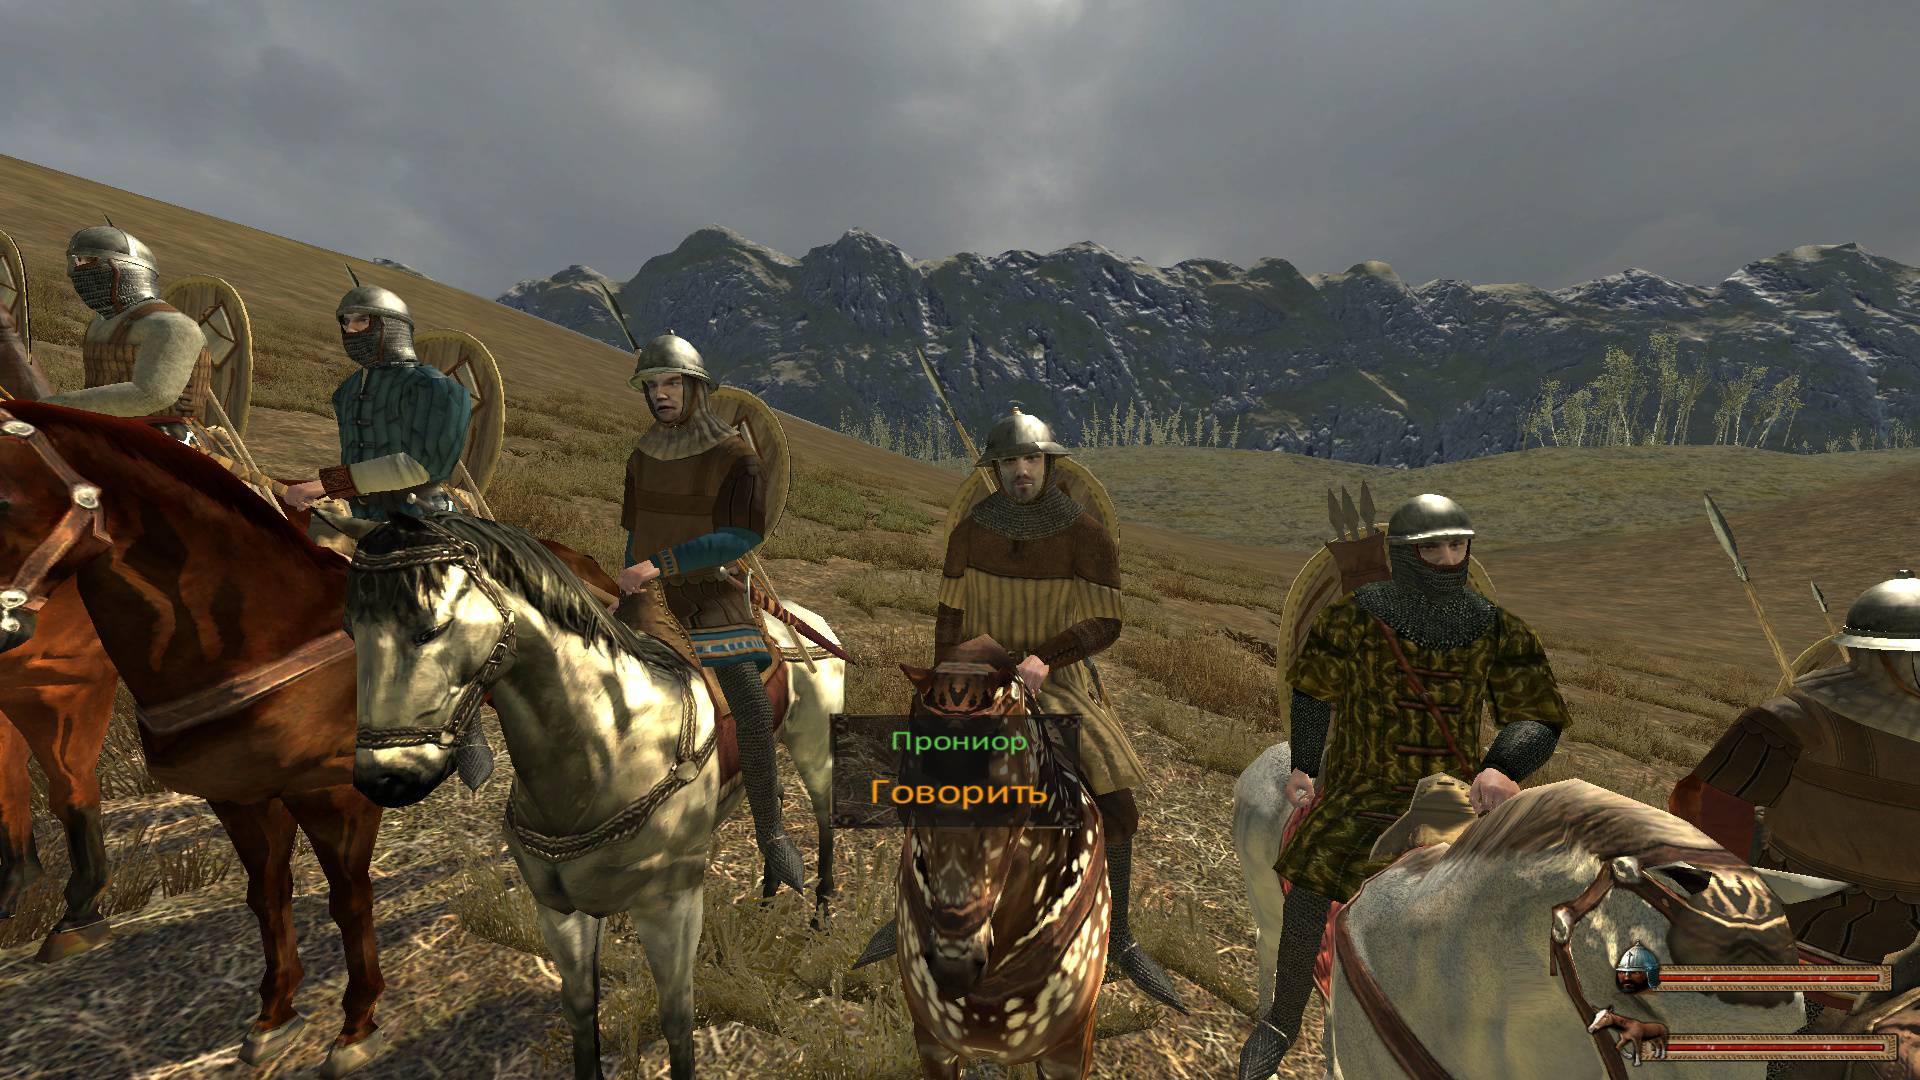 Warband Medieval Conquest. Medieval Conquest Mount Blade Warband. Мод для варбанд Medieval Conquest. Medieval Conquest русификатор. Steam warband